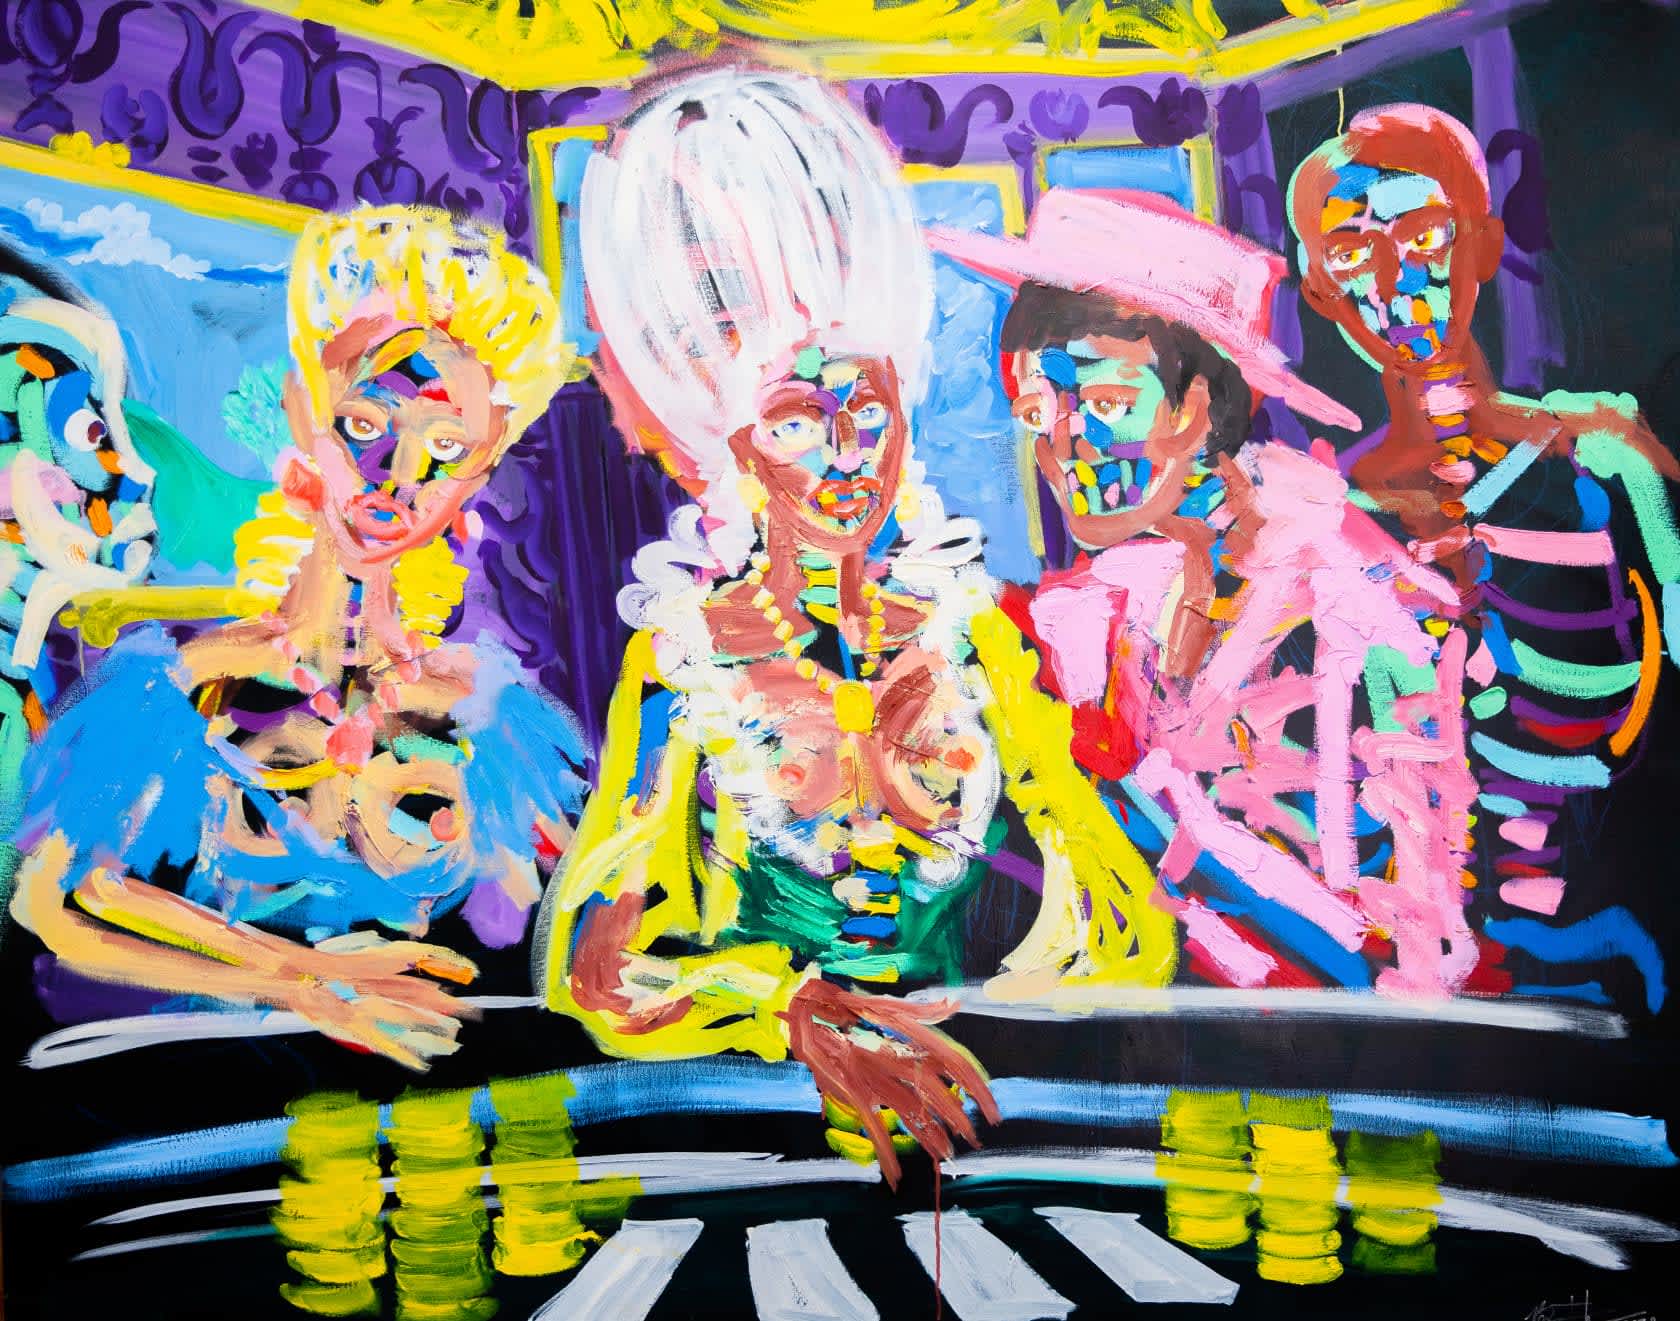 Modern Day Artists Inspired by the 18th Century, From the Miaz Brothers to Bradley Theodore, we look at the artists...